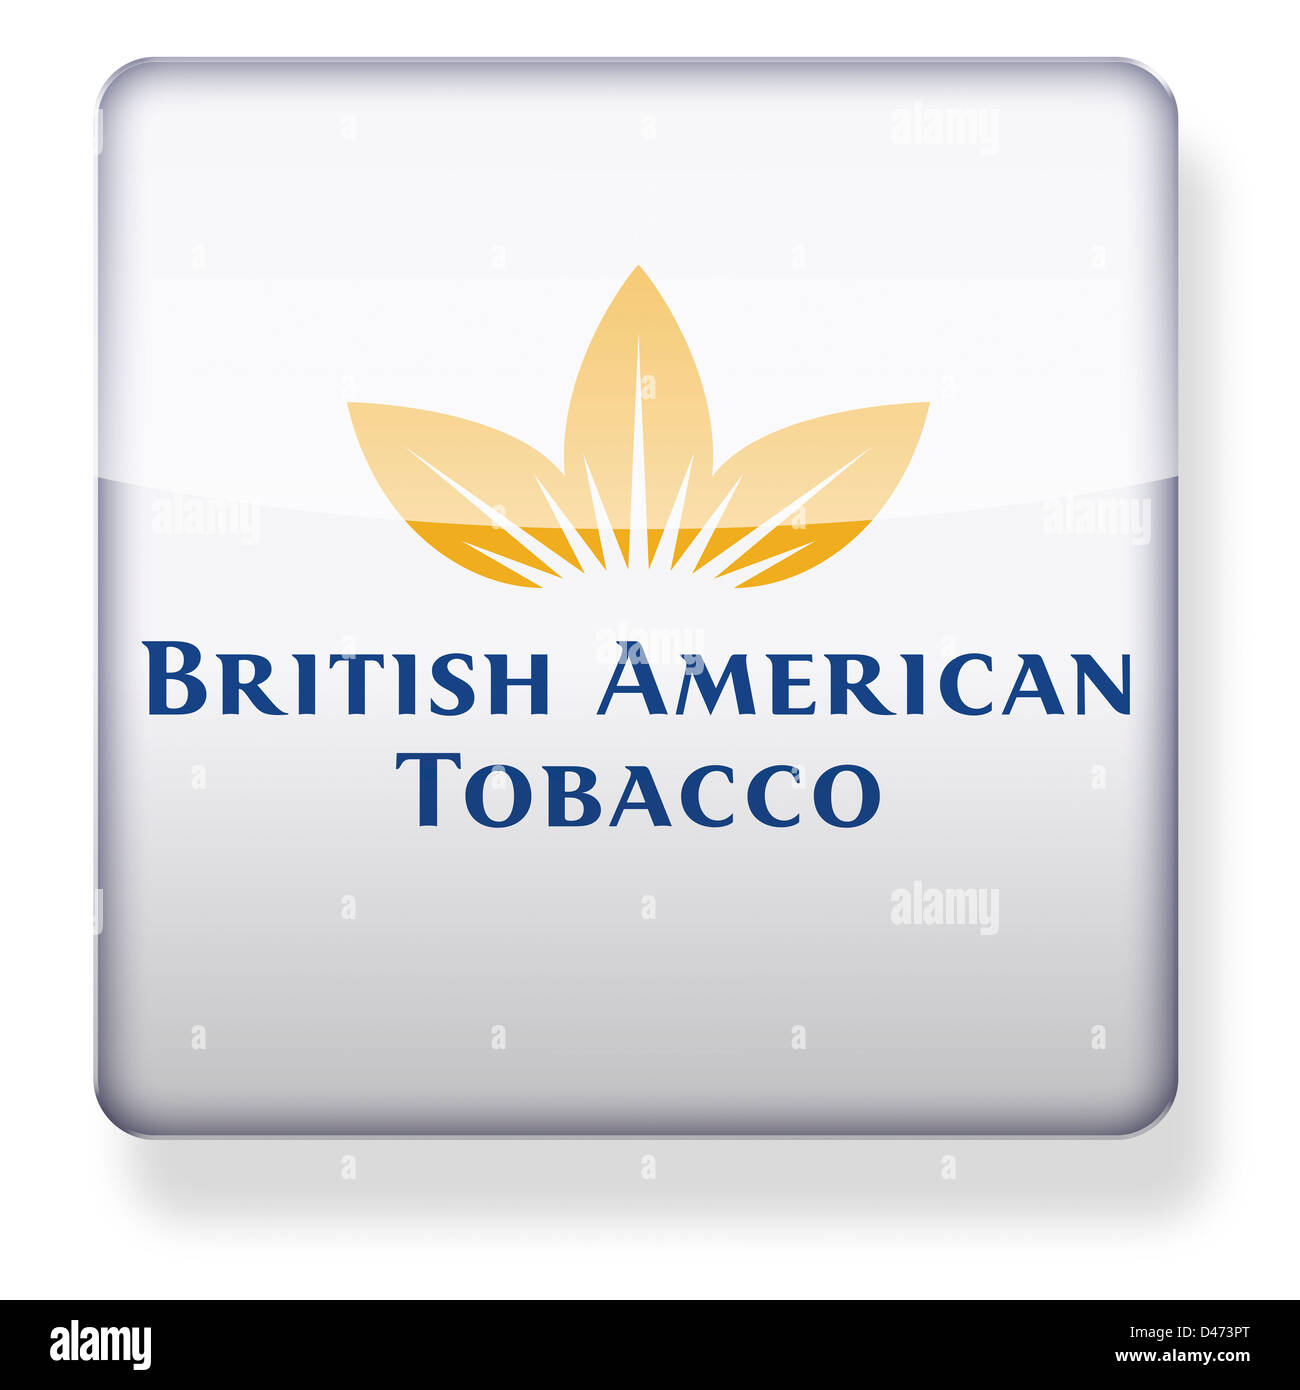 British American Tobacco logo as an app icon. Clipping path included. Stock Photo